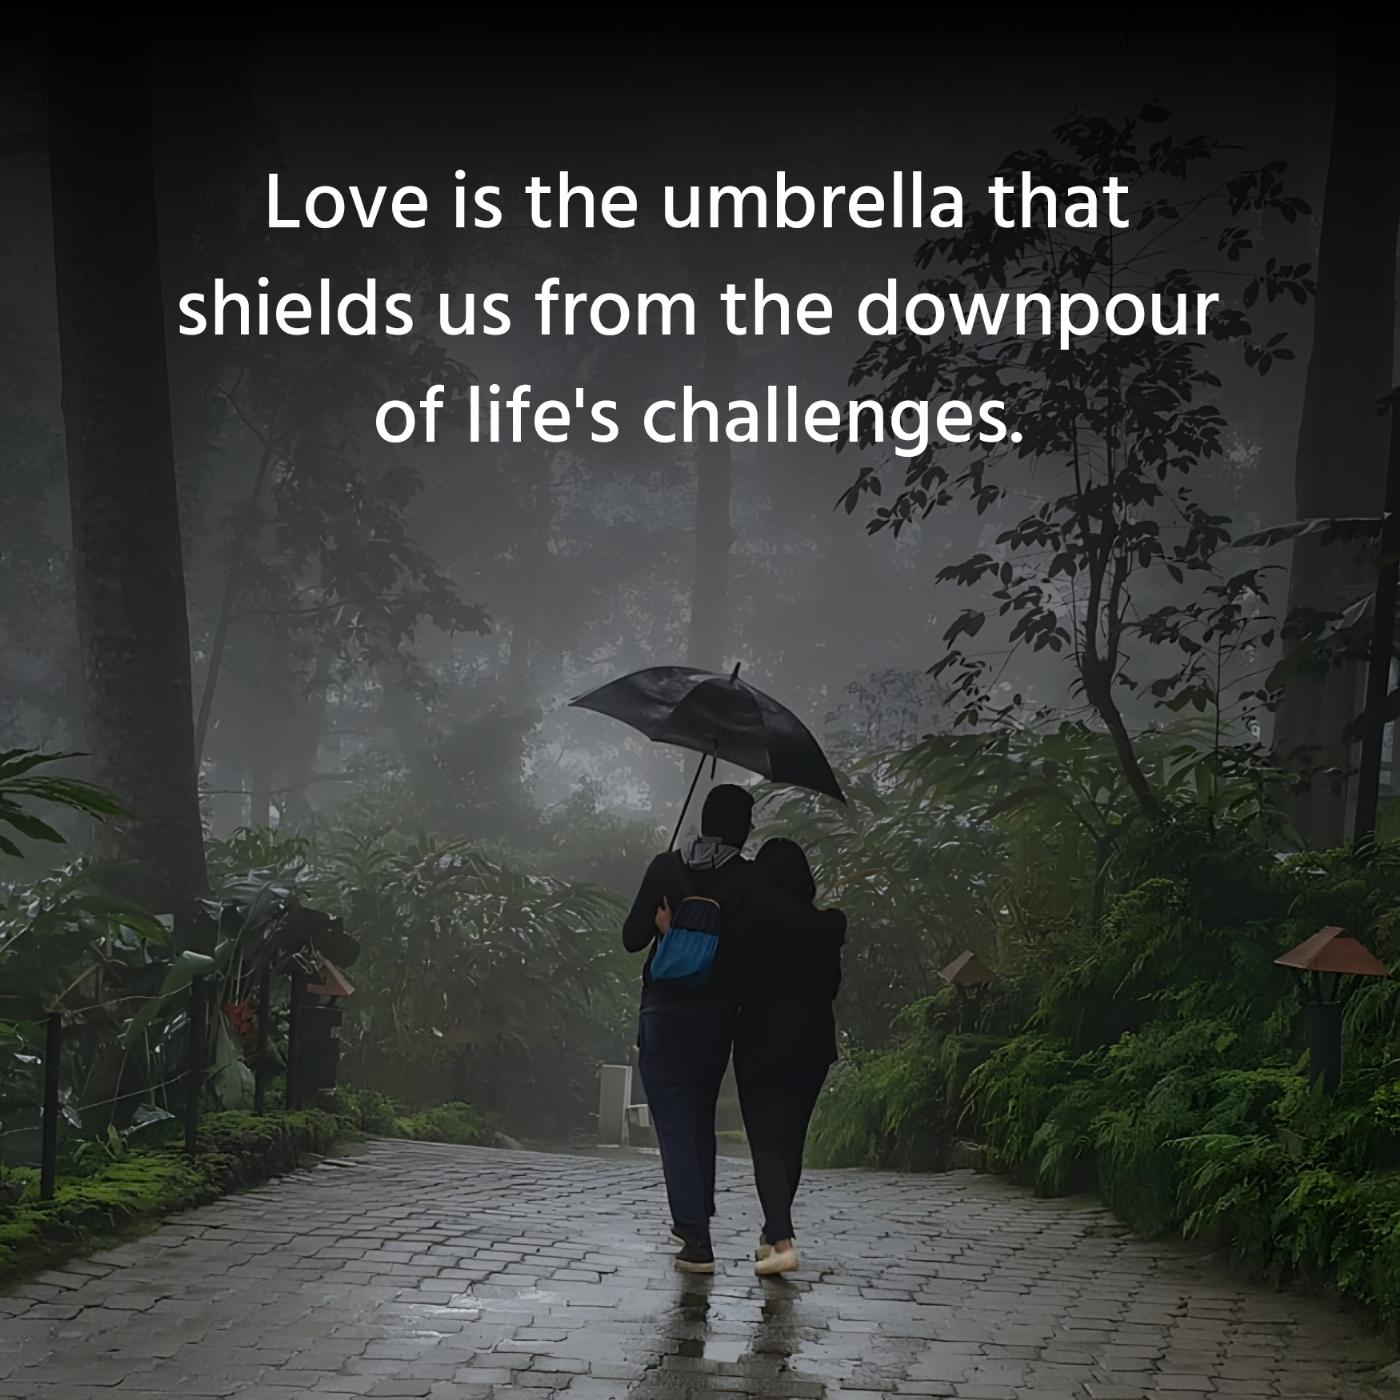 Love is the umbrella that shields us from the downpour